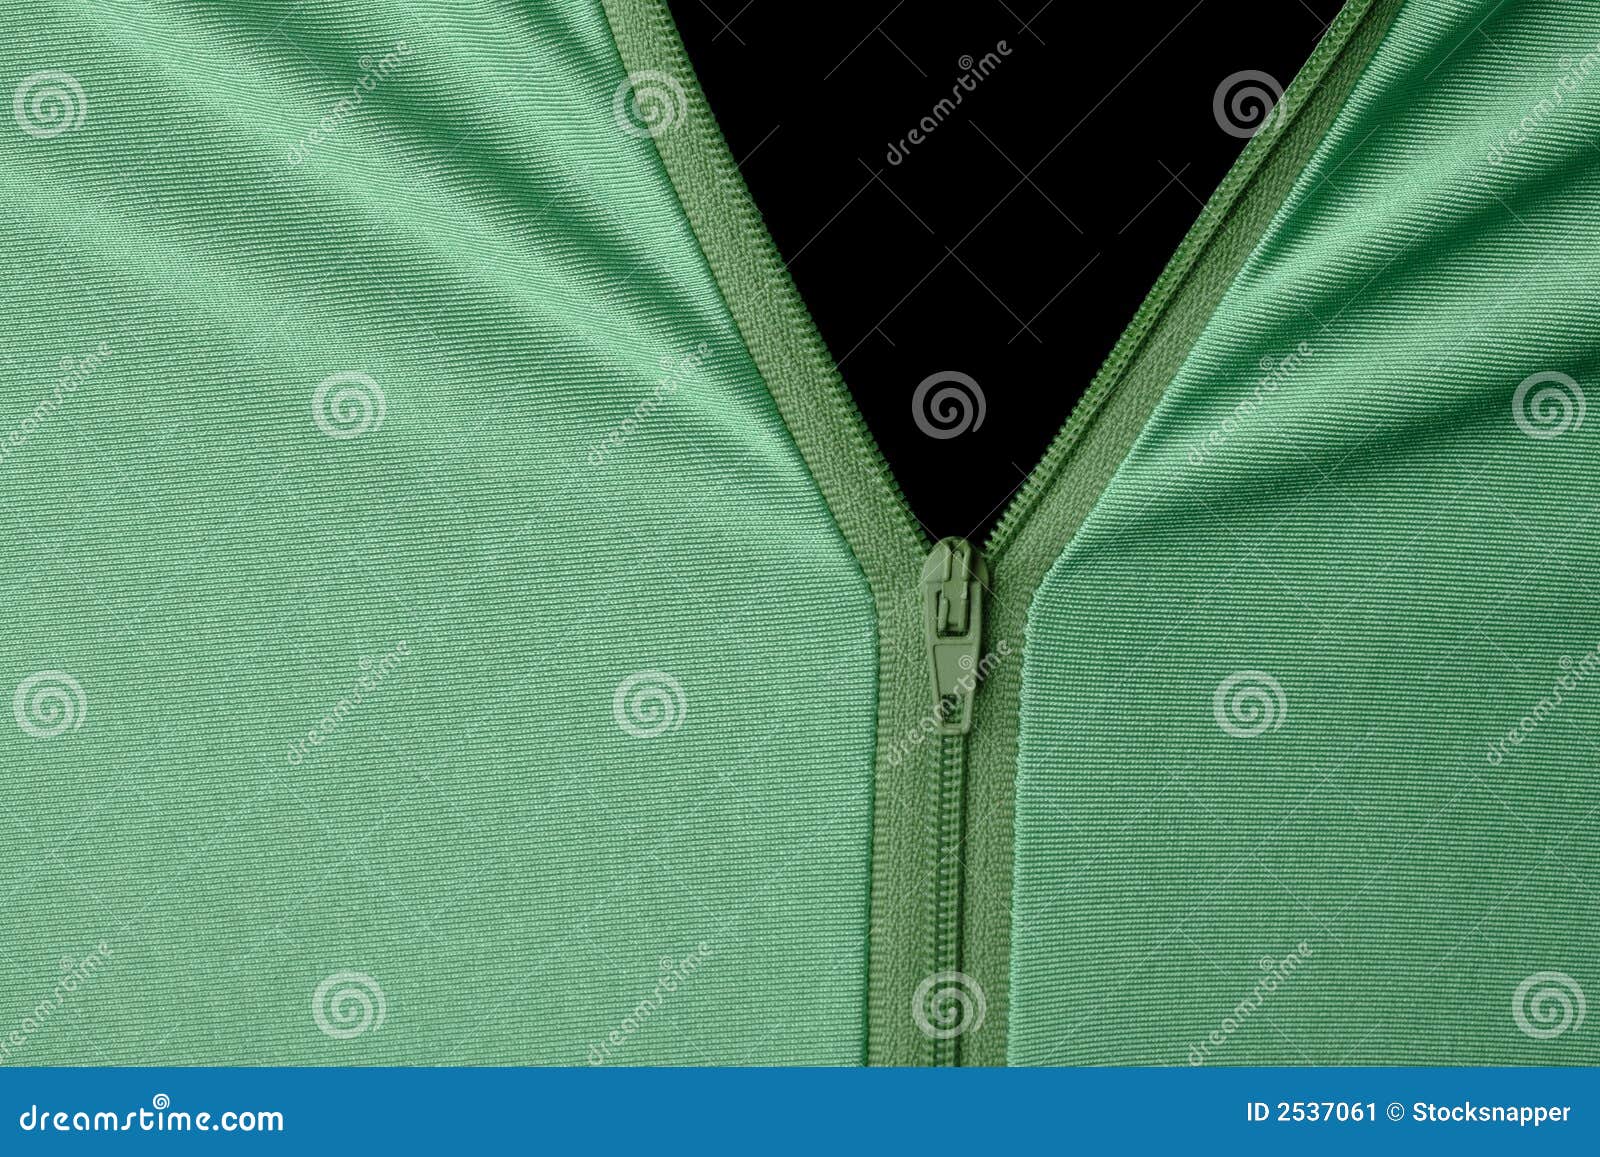 Zipper stock image. Image of fabric, stretchy, texture - 2537061